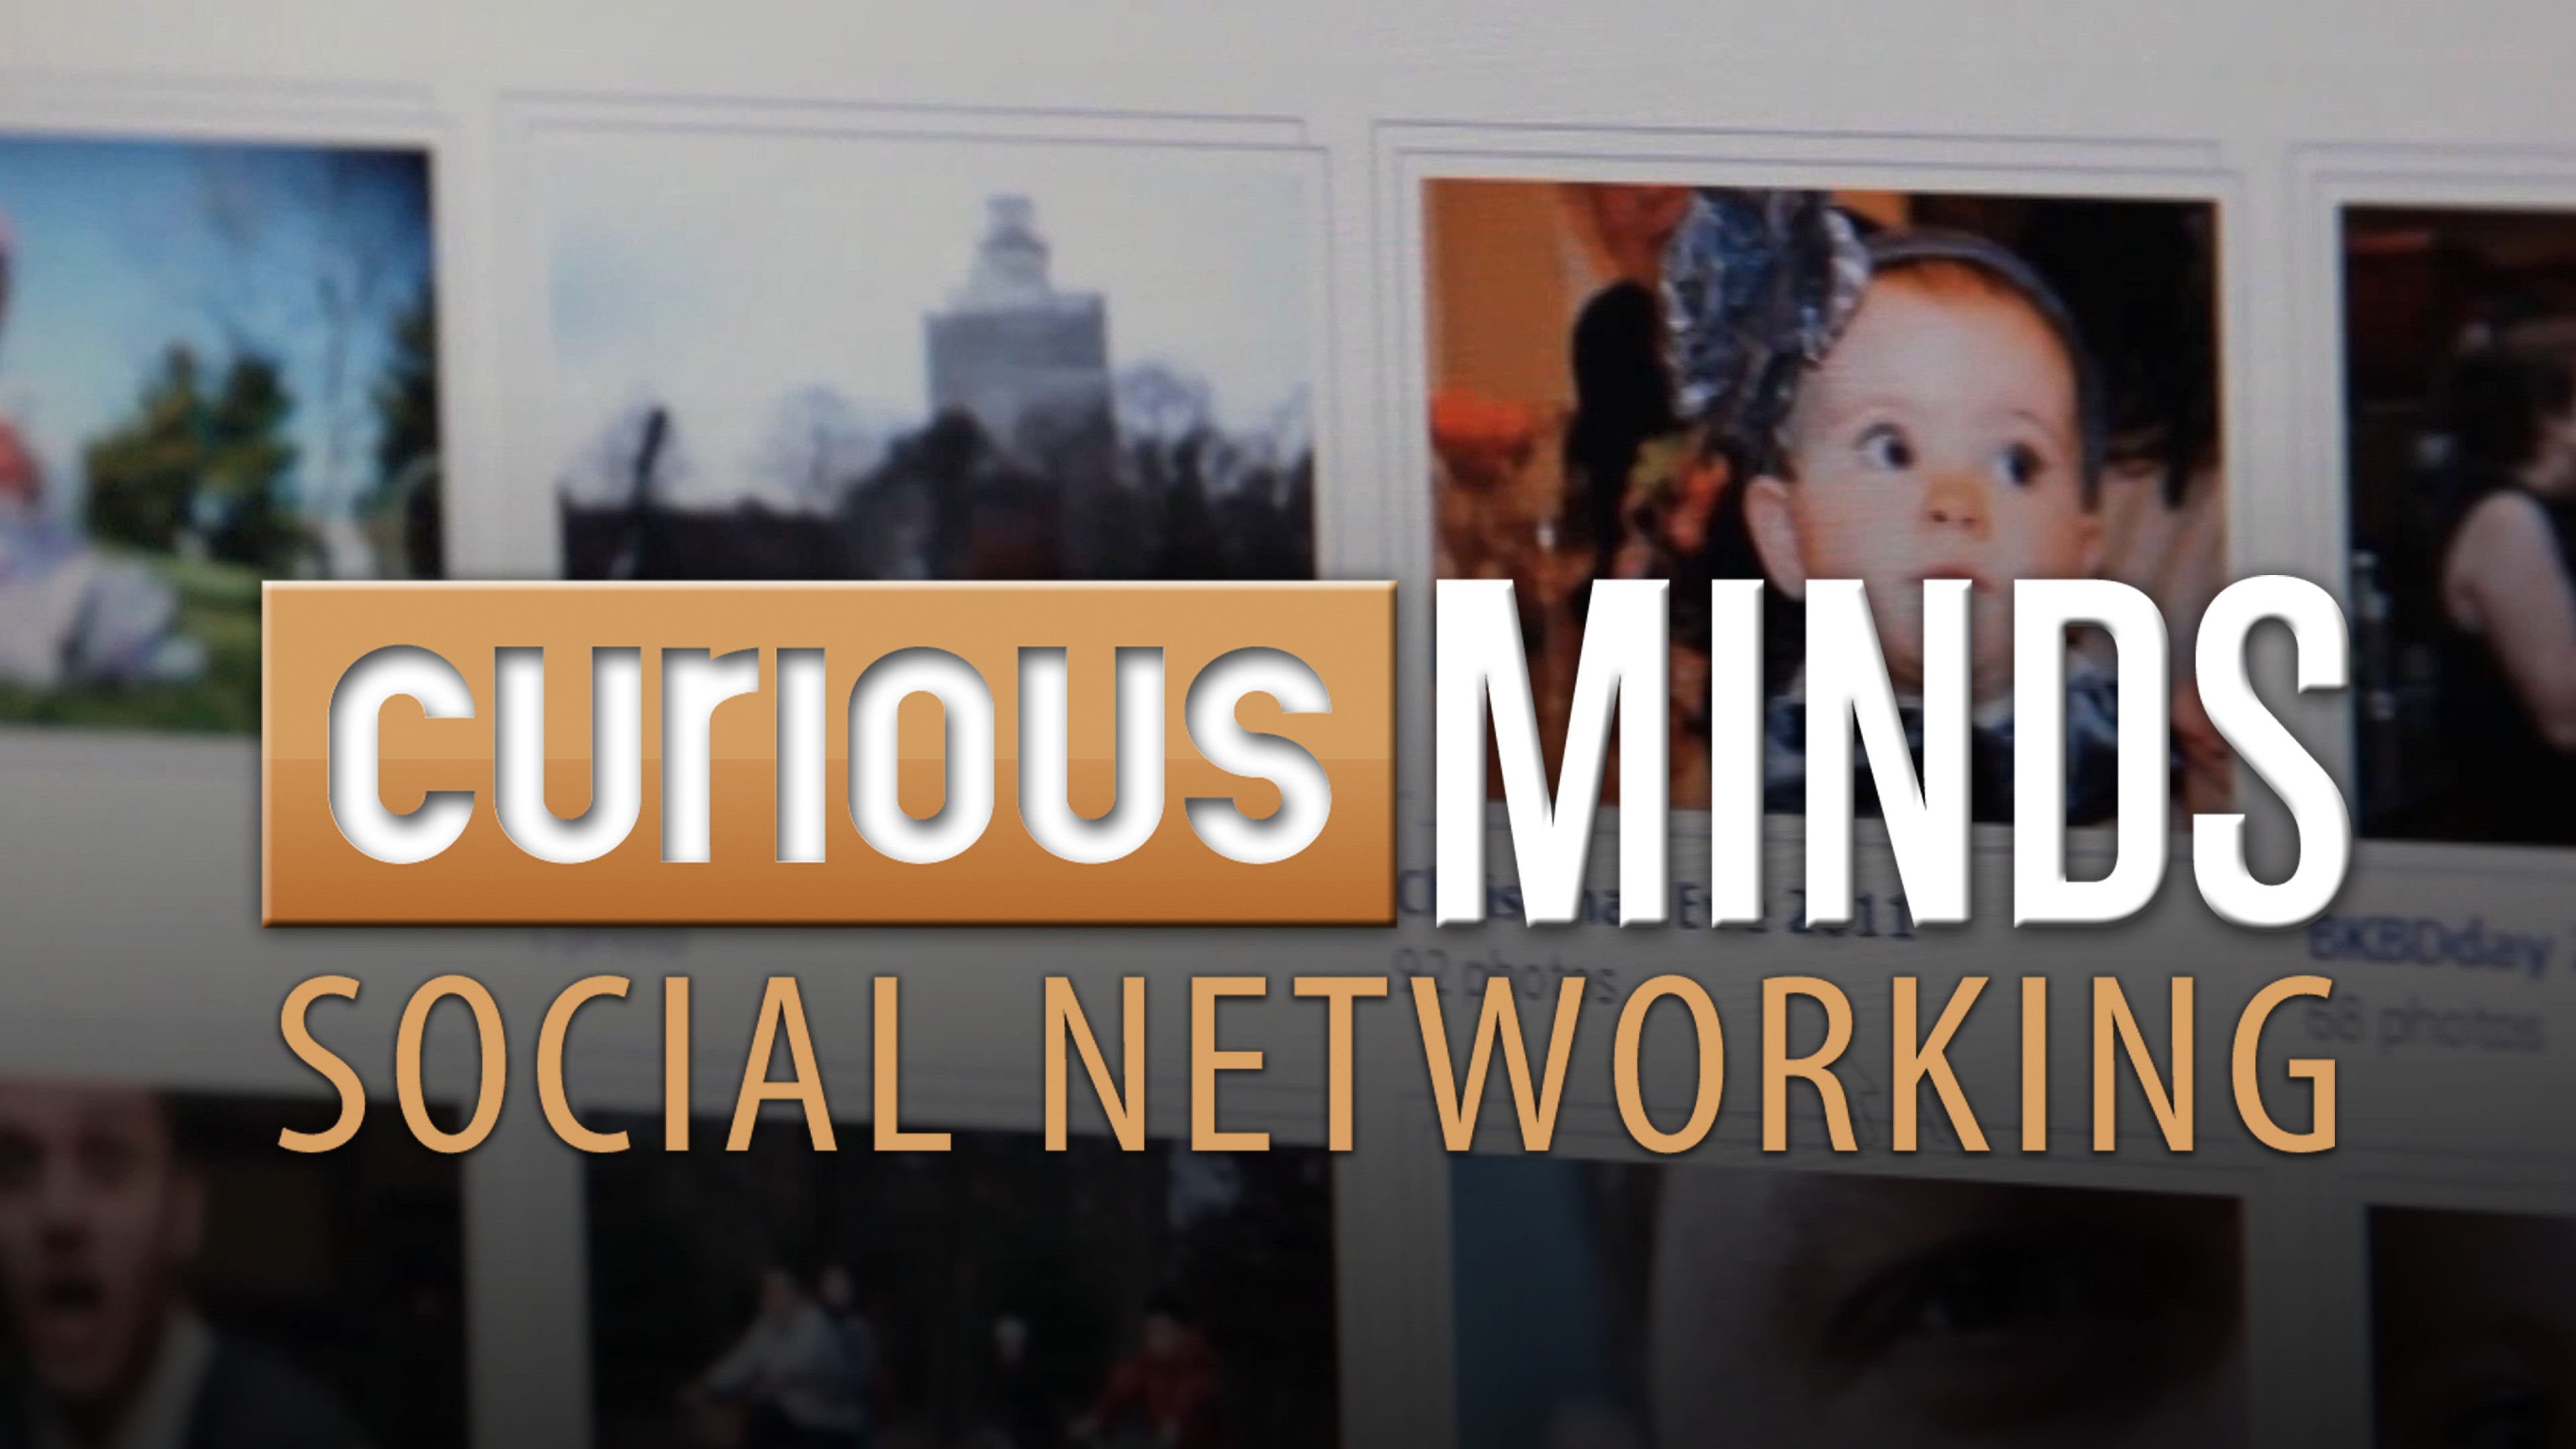 Curious Minds: Social Networking